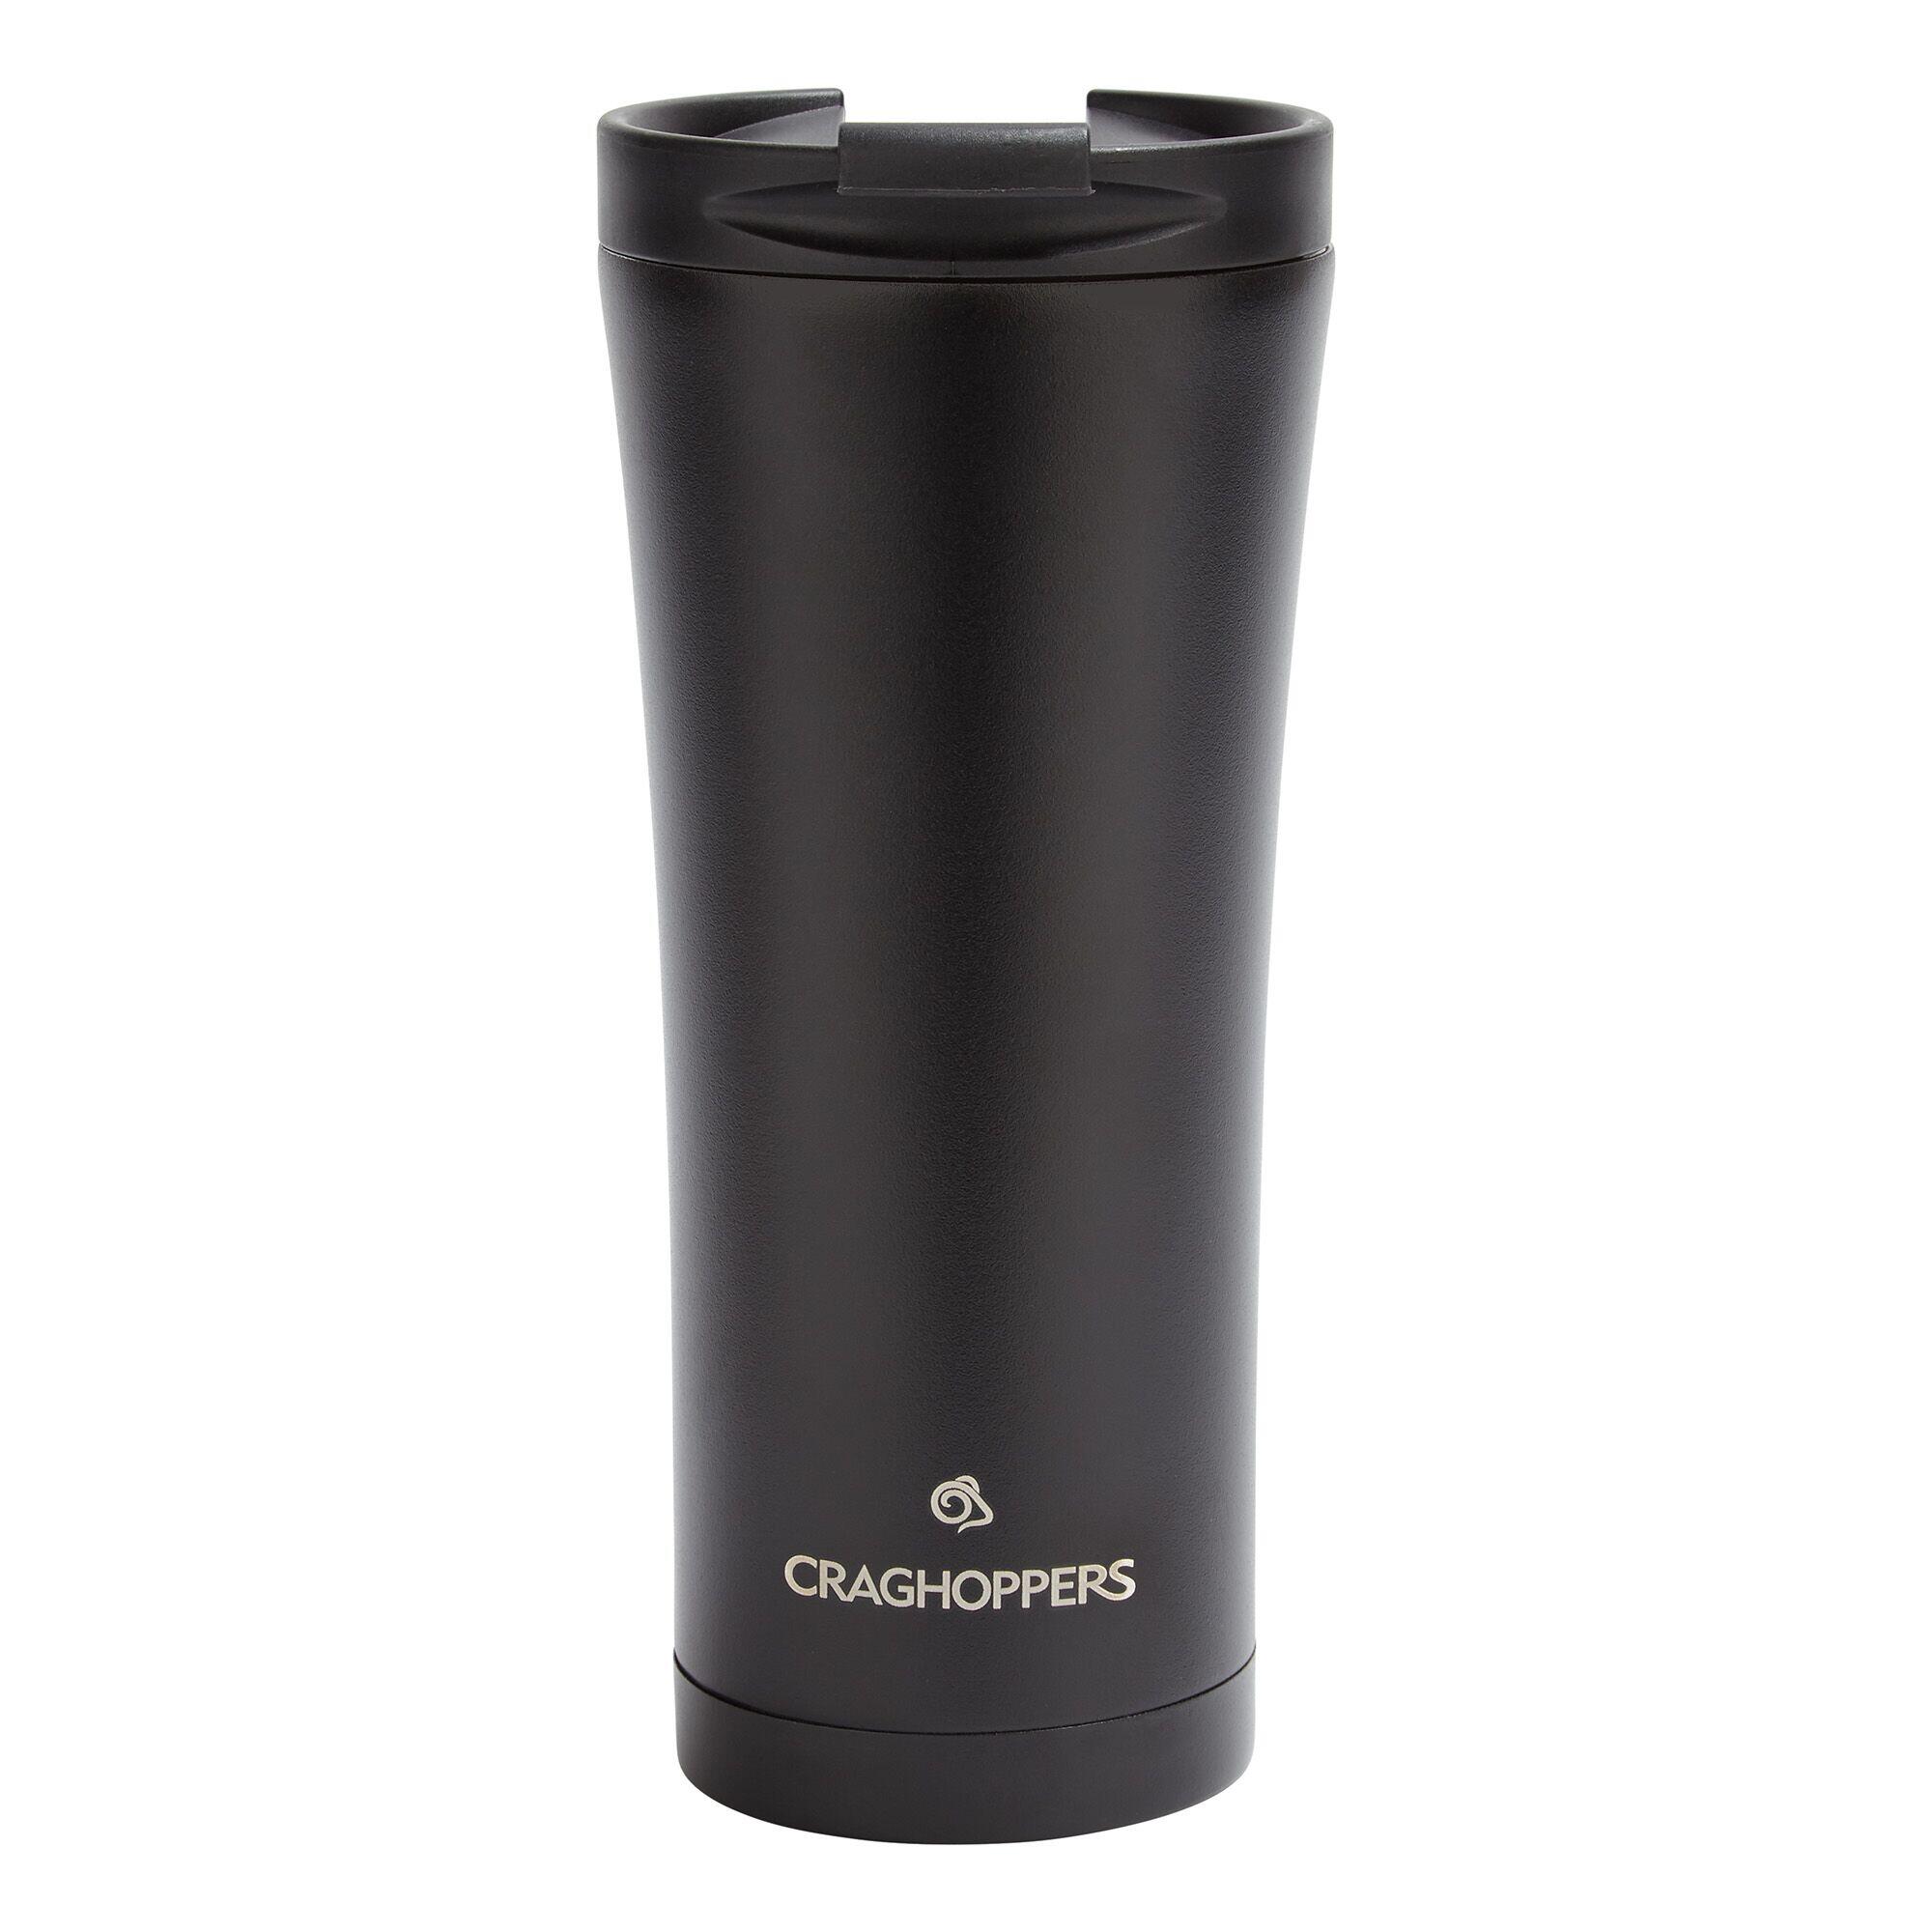 CRAGHOPPERS Insulated Tumbler